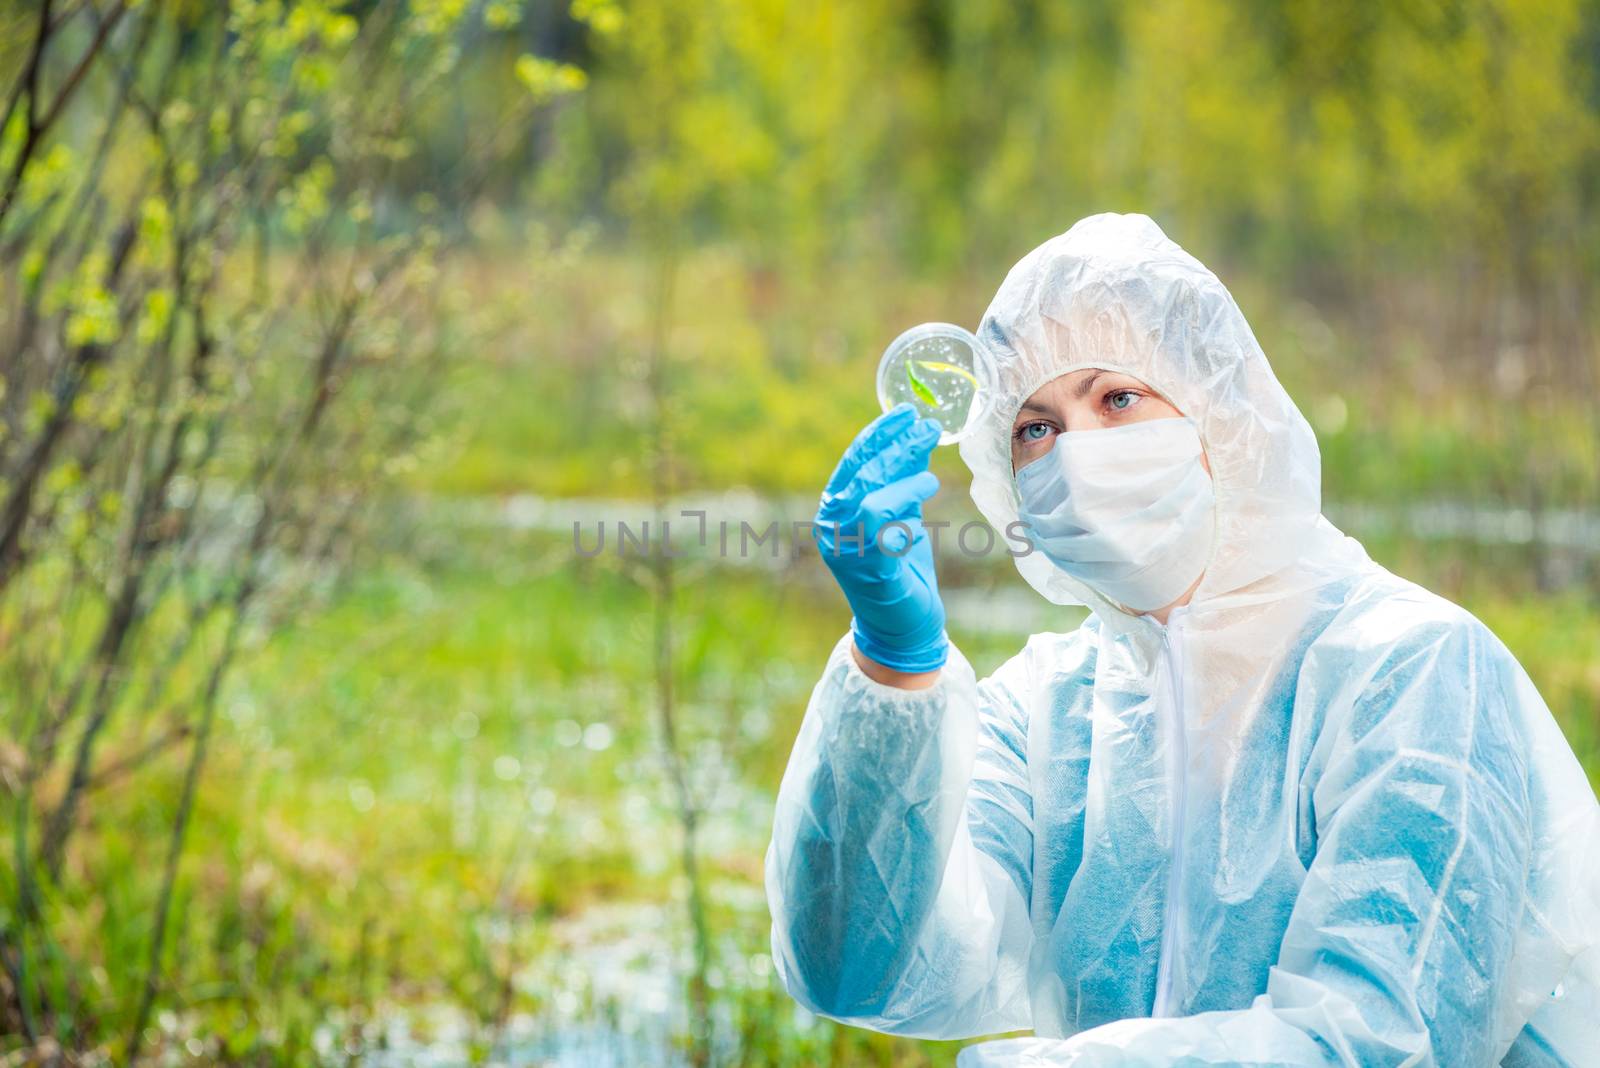 environmentalist in protective clothing examines infected plants by kosmsos111